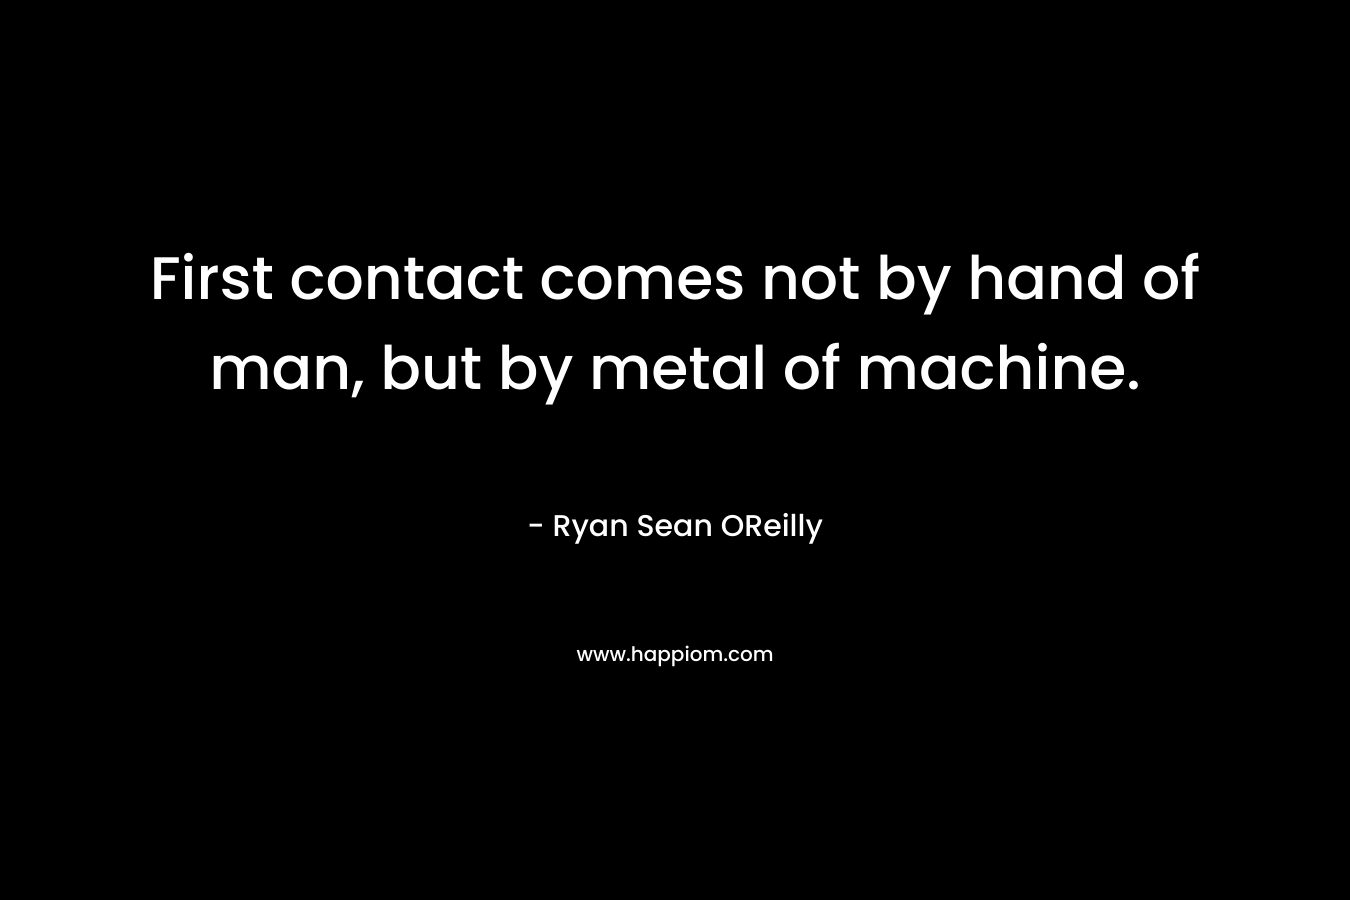 First contact comes not by hand of man, but by metal of machine. – Ryan Sean OReilly